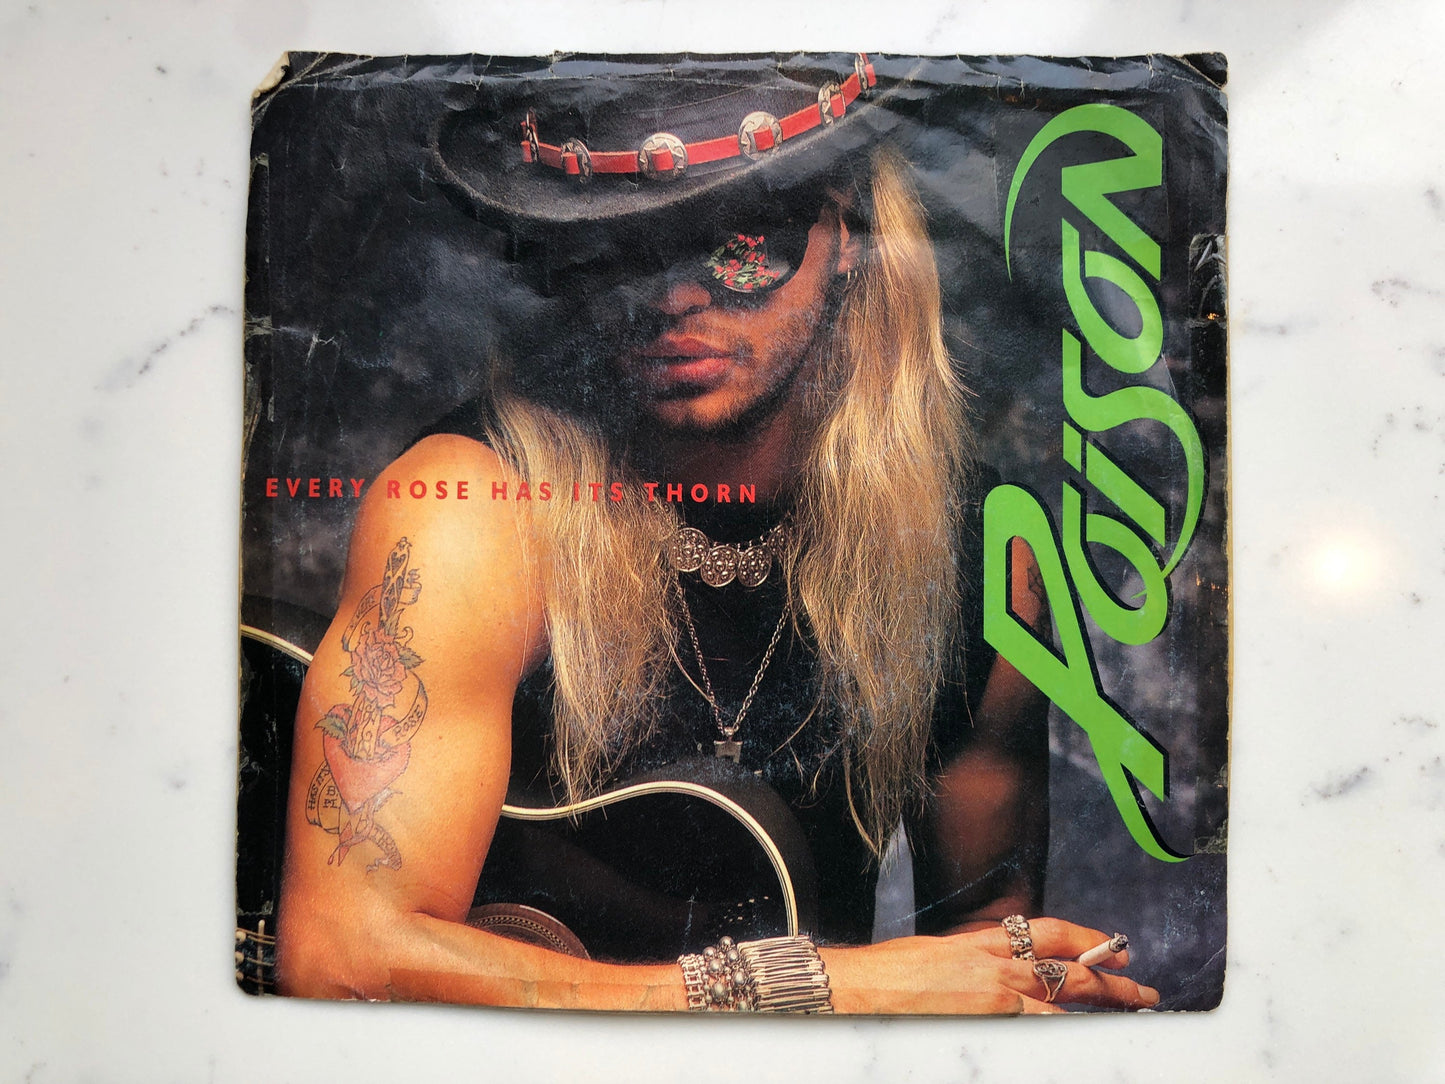 Poison • Every Rose Has It’s Thorn • Livin’ For The Minute • Enigma B-44203 • Vintage Vinyl Records • Bret Michaels • C.C. DeVille